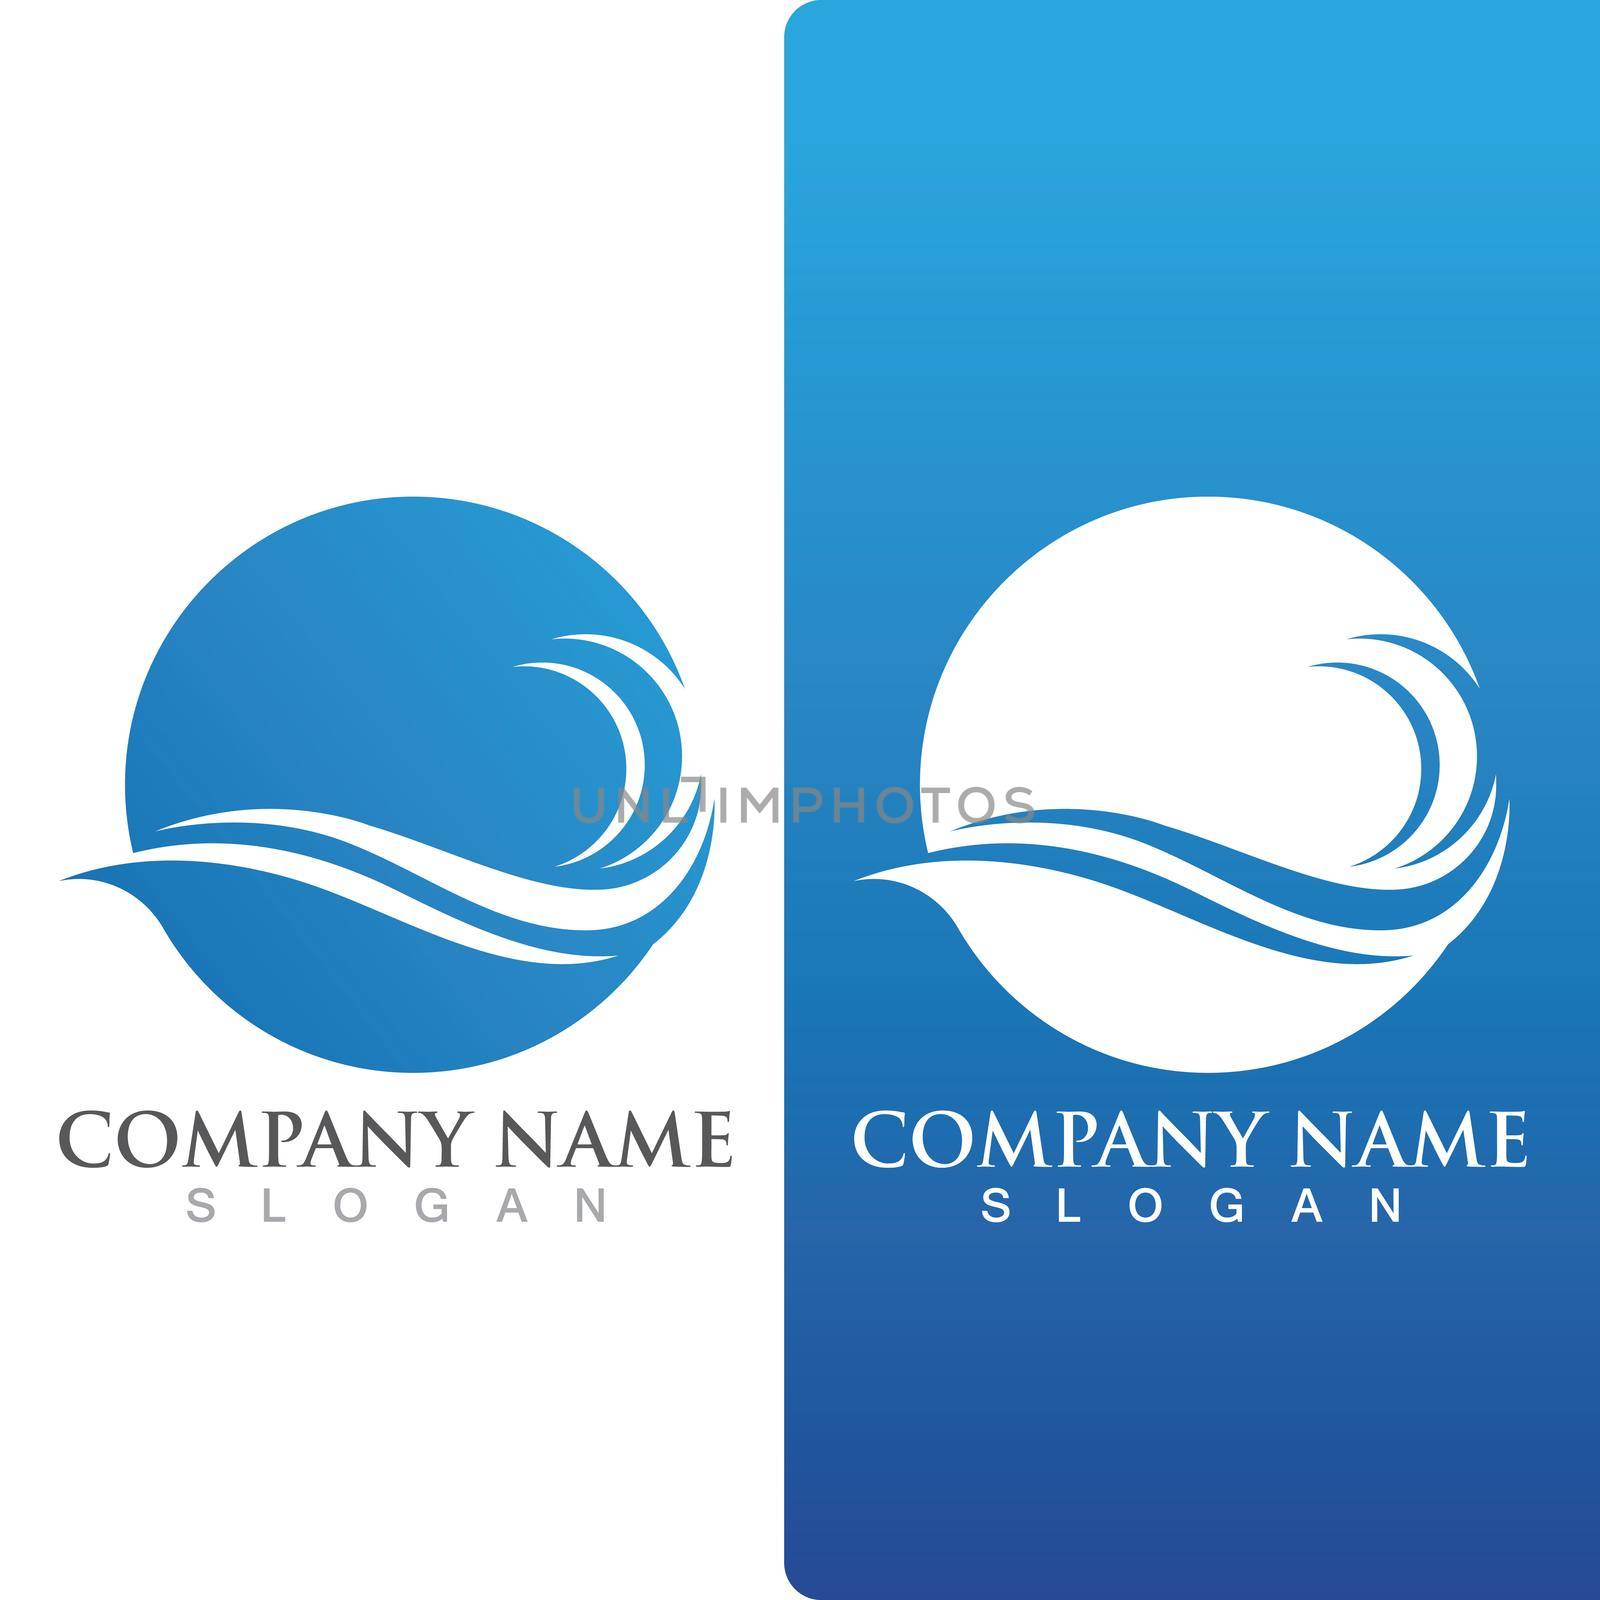 Water wave logo icon vector by Mrsongrphc